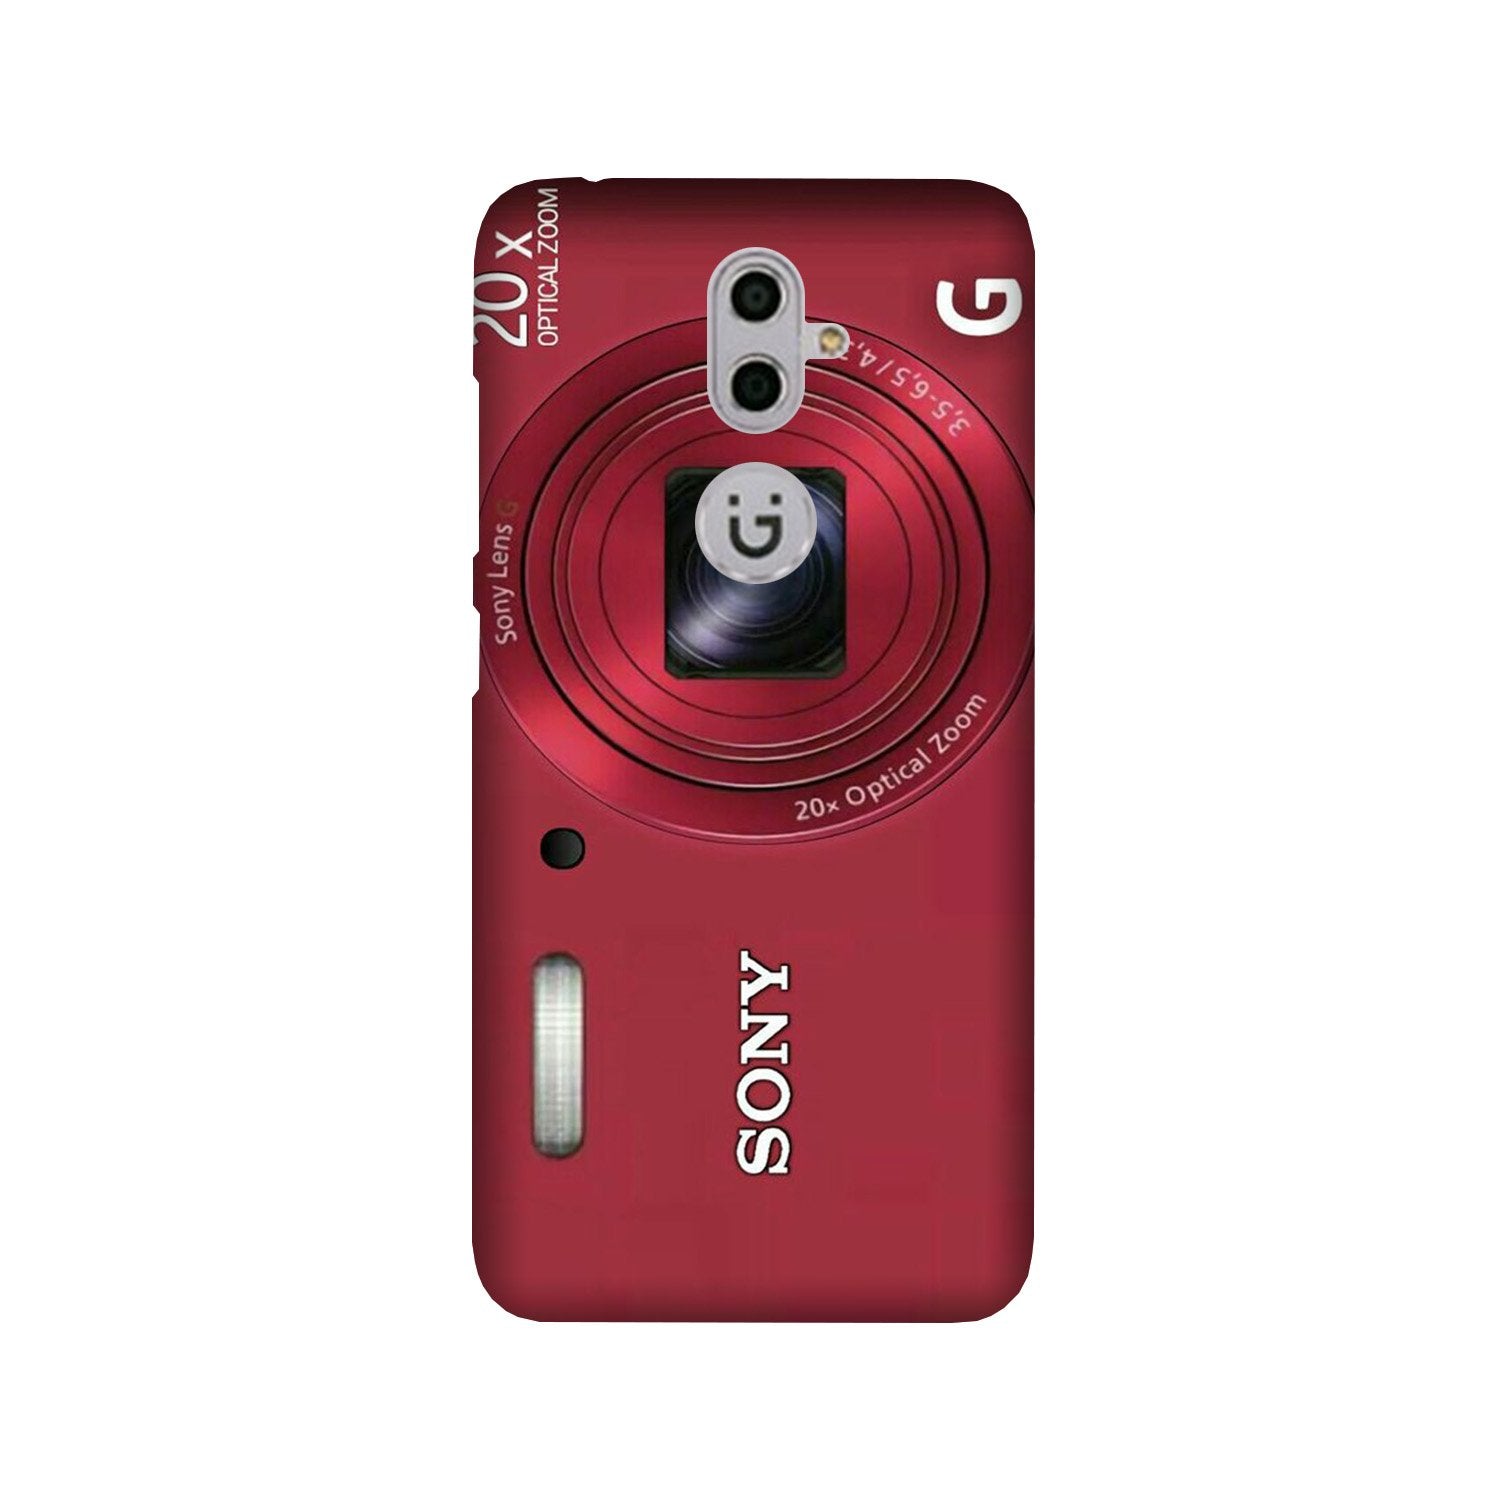 Sony Case for Gionee S9 (Design No. 274)